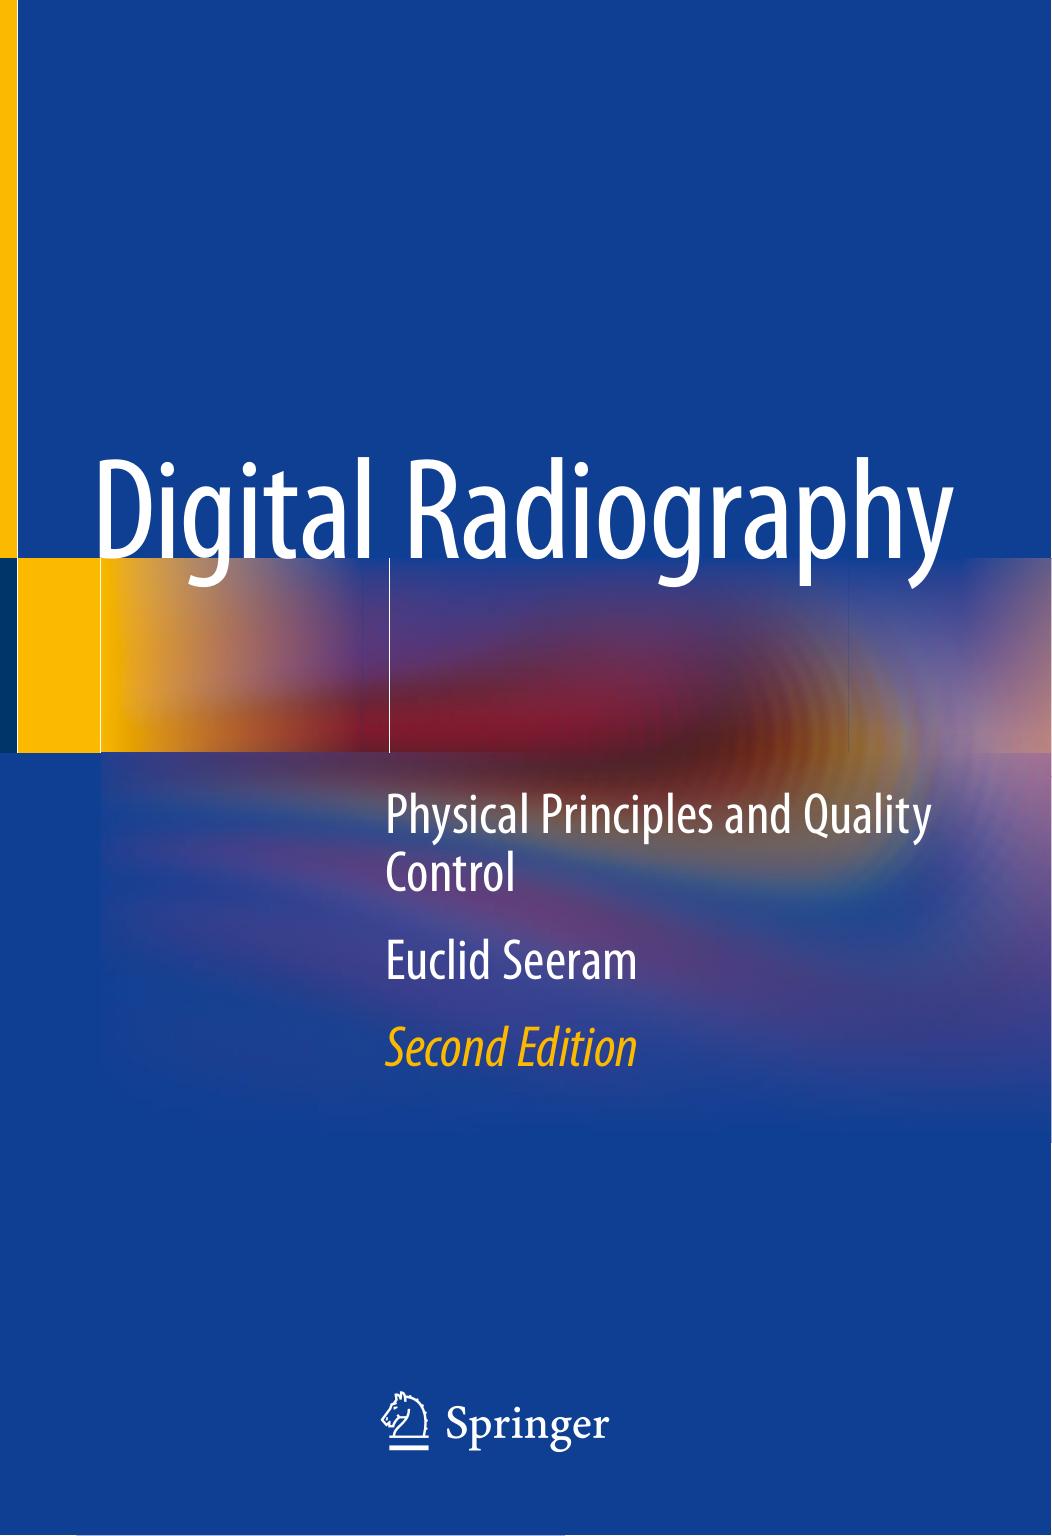 Digital Radiography Physical Principles and Quality Control 2019